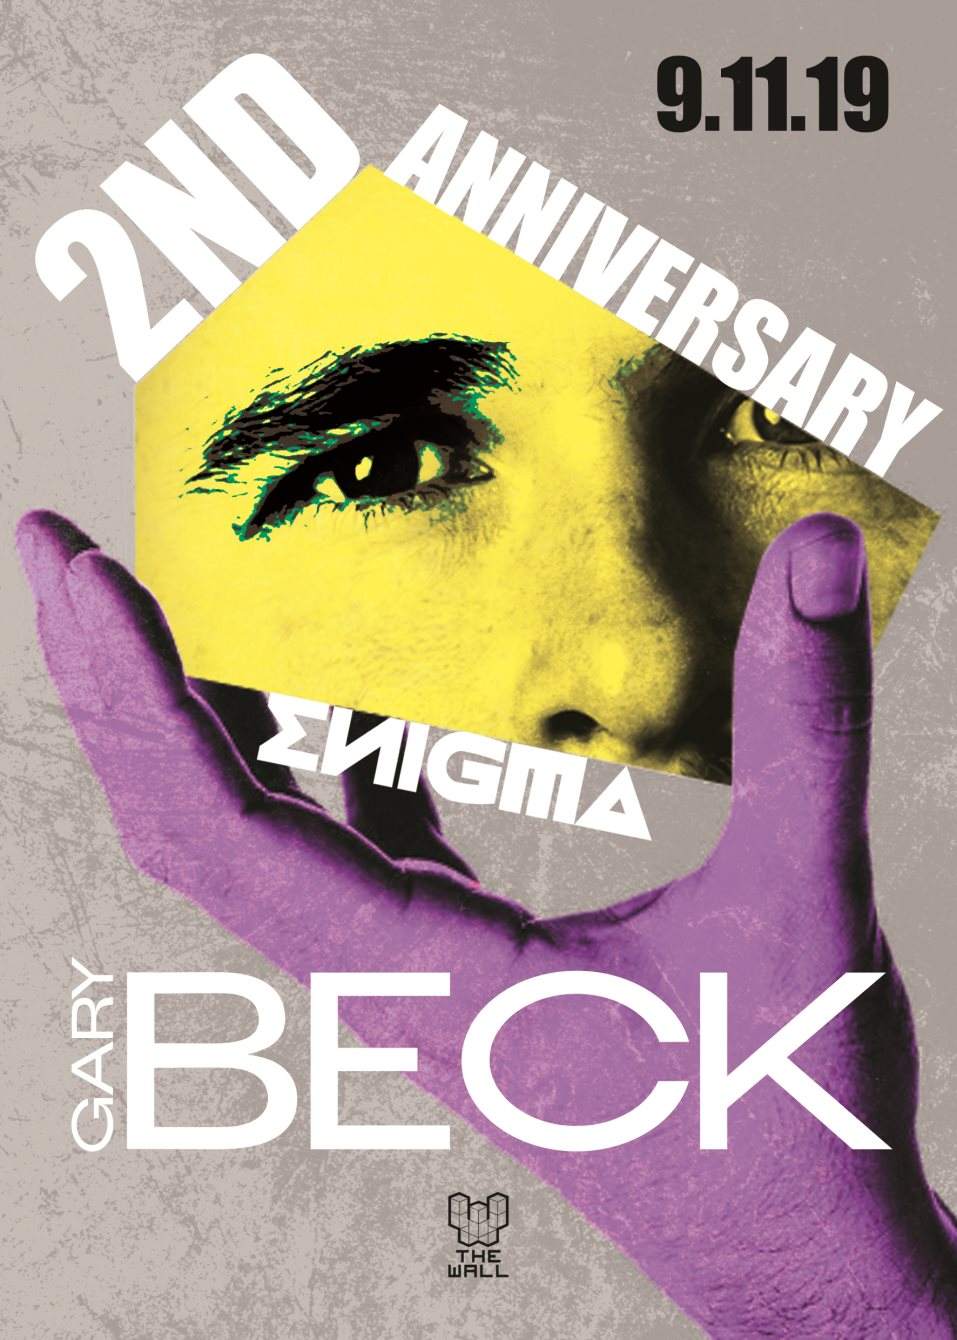 Enigma 2nd Anniversary with Gary Beck - Página frontal